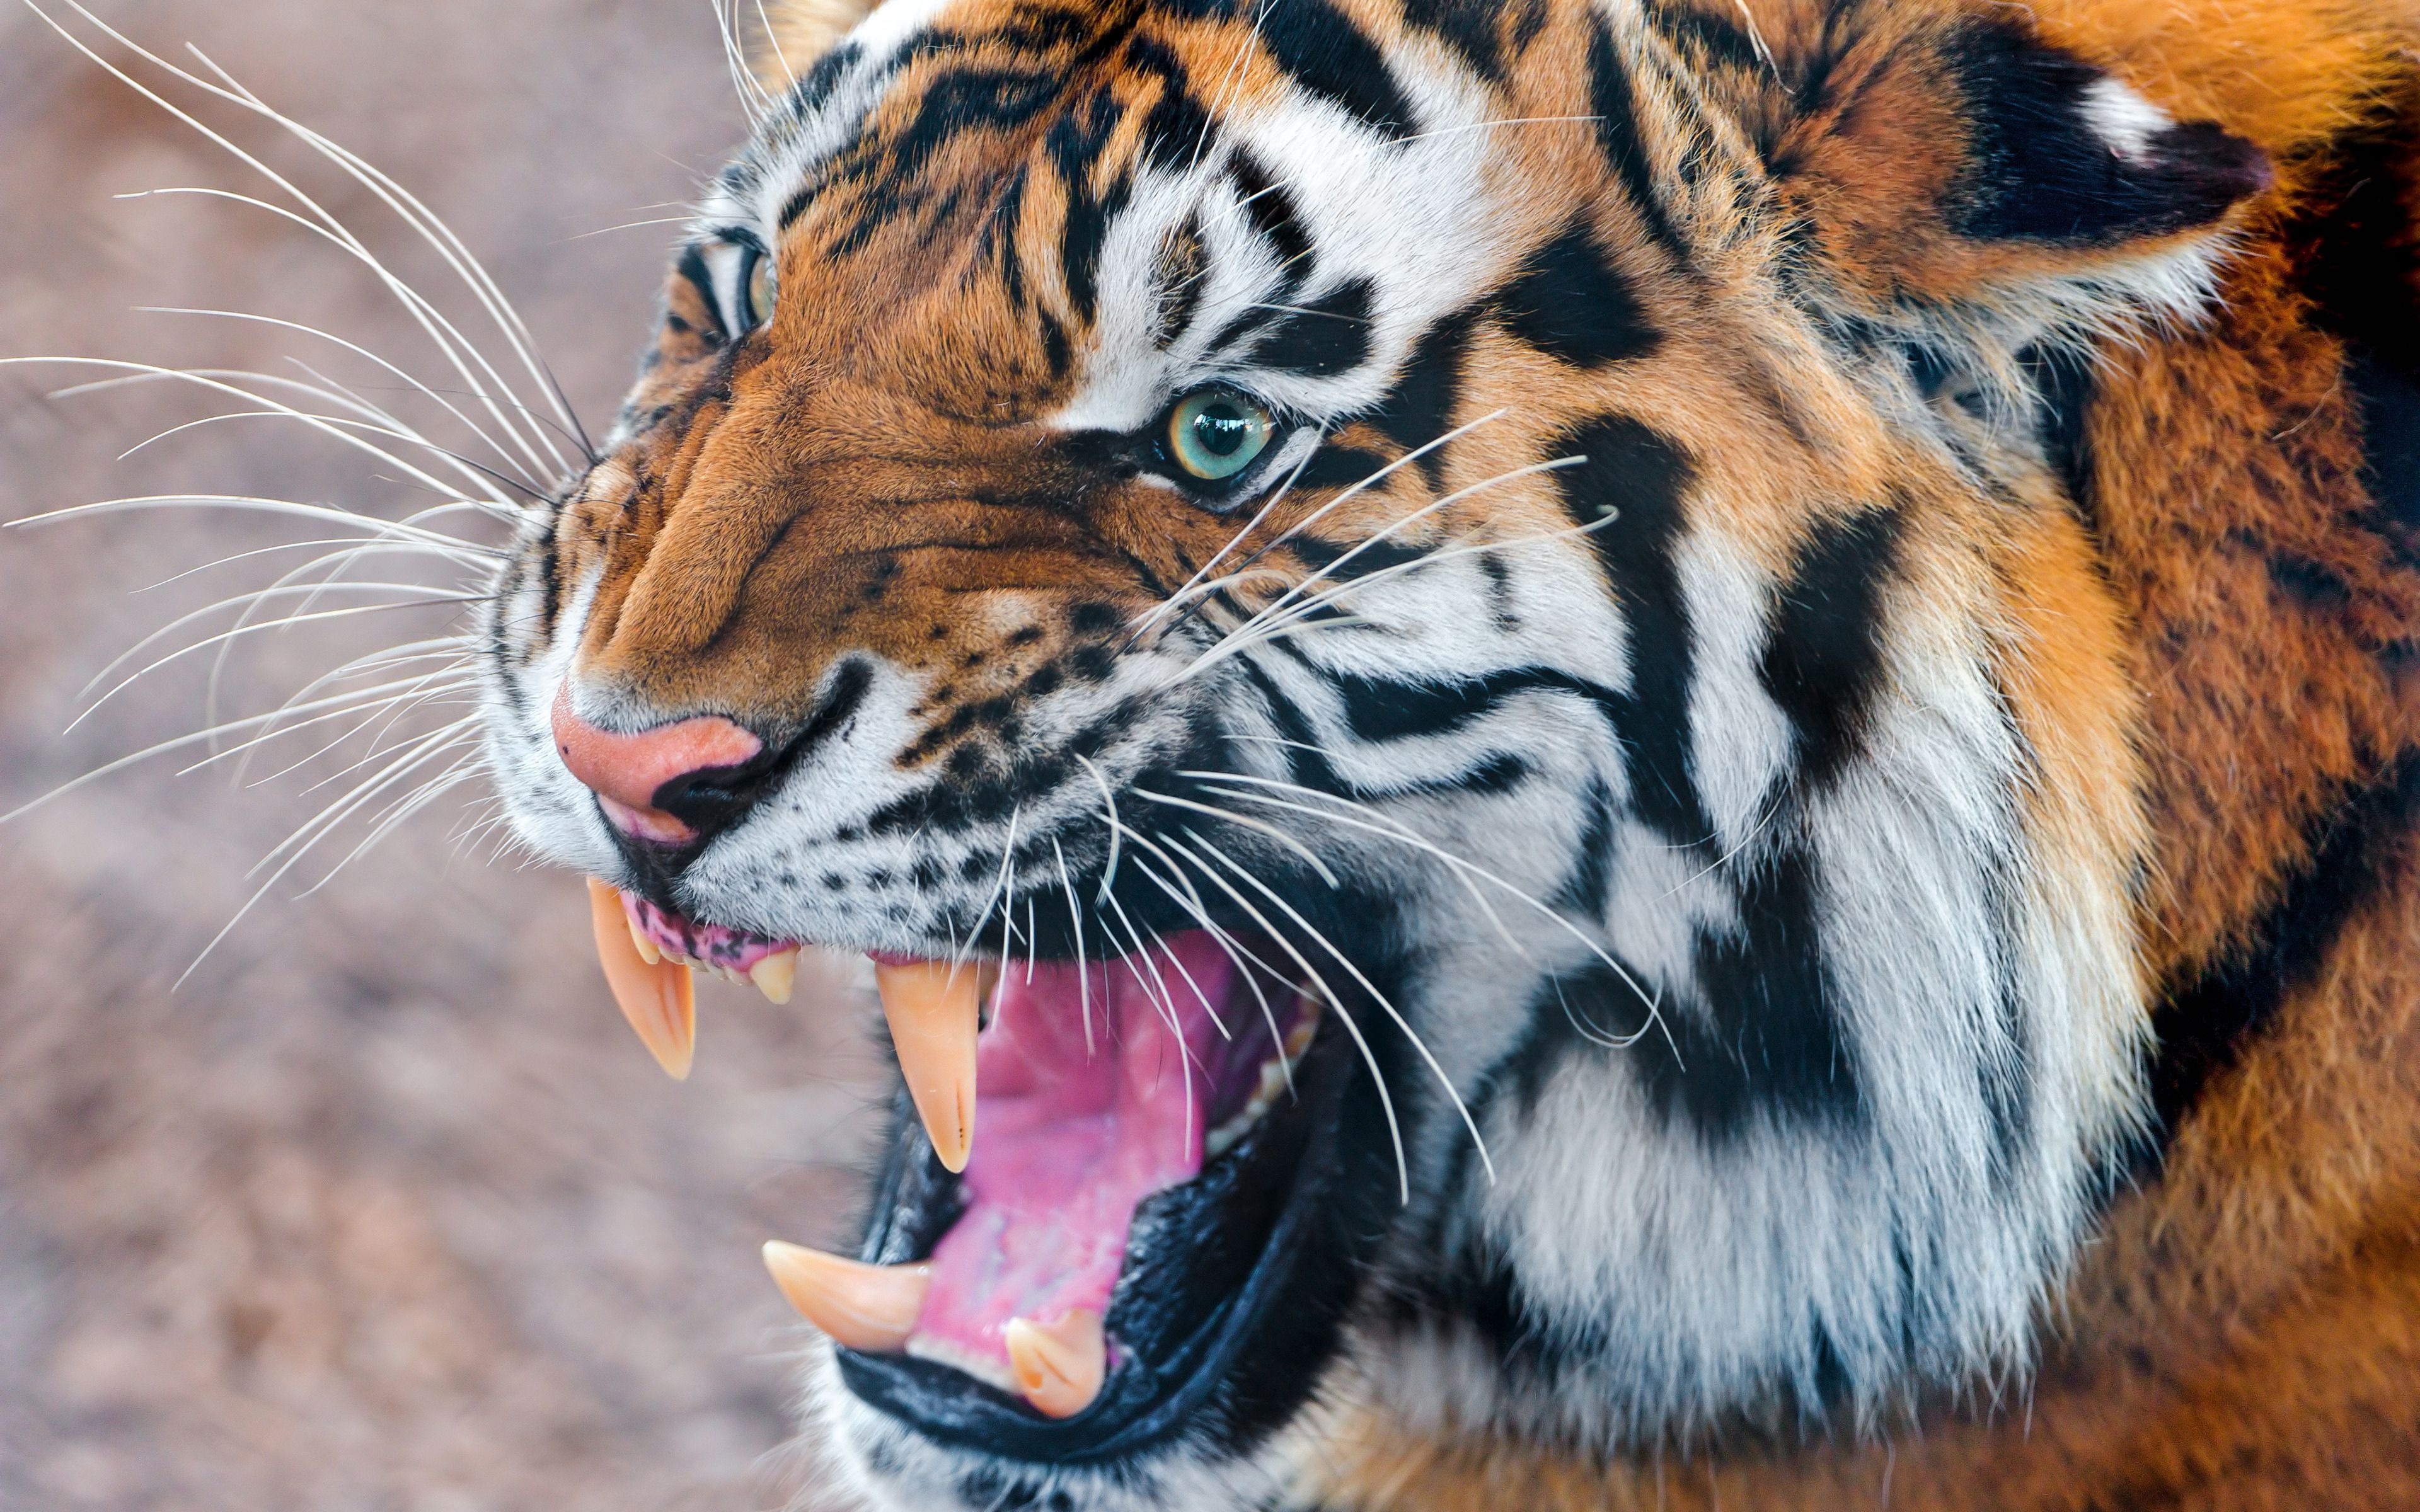 tiger, animals, aggression, grin, muzzle, anger wallpaper for mobile